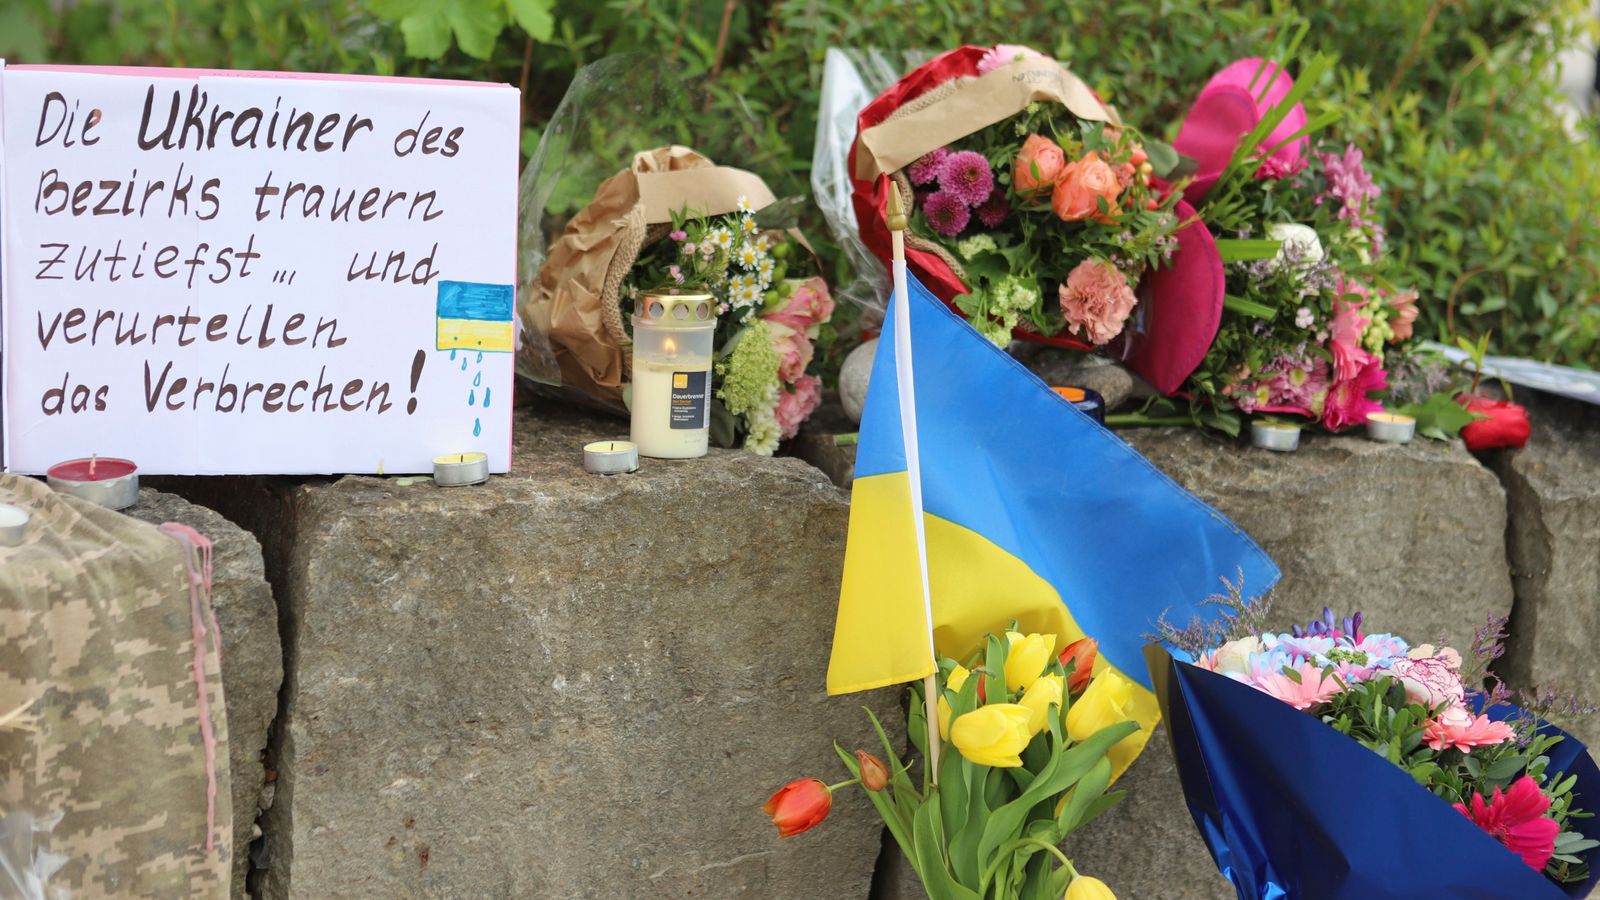 Russian man arrested after two Ukrainians stabbed to death in Germany